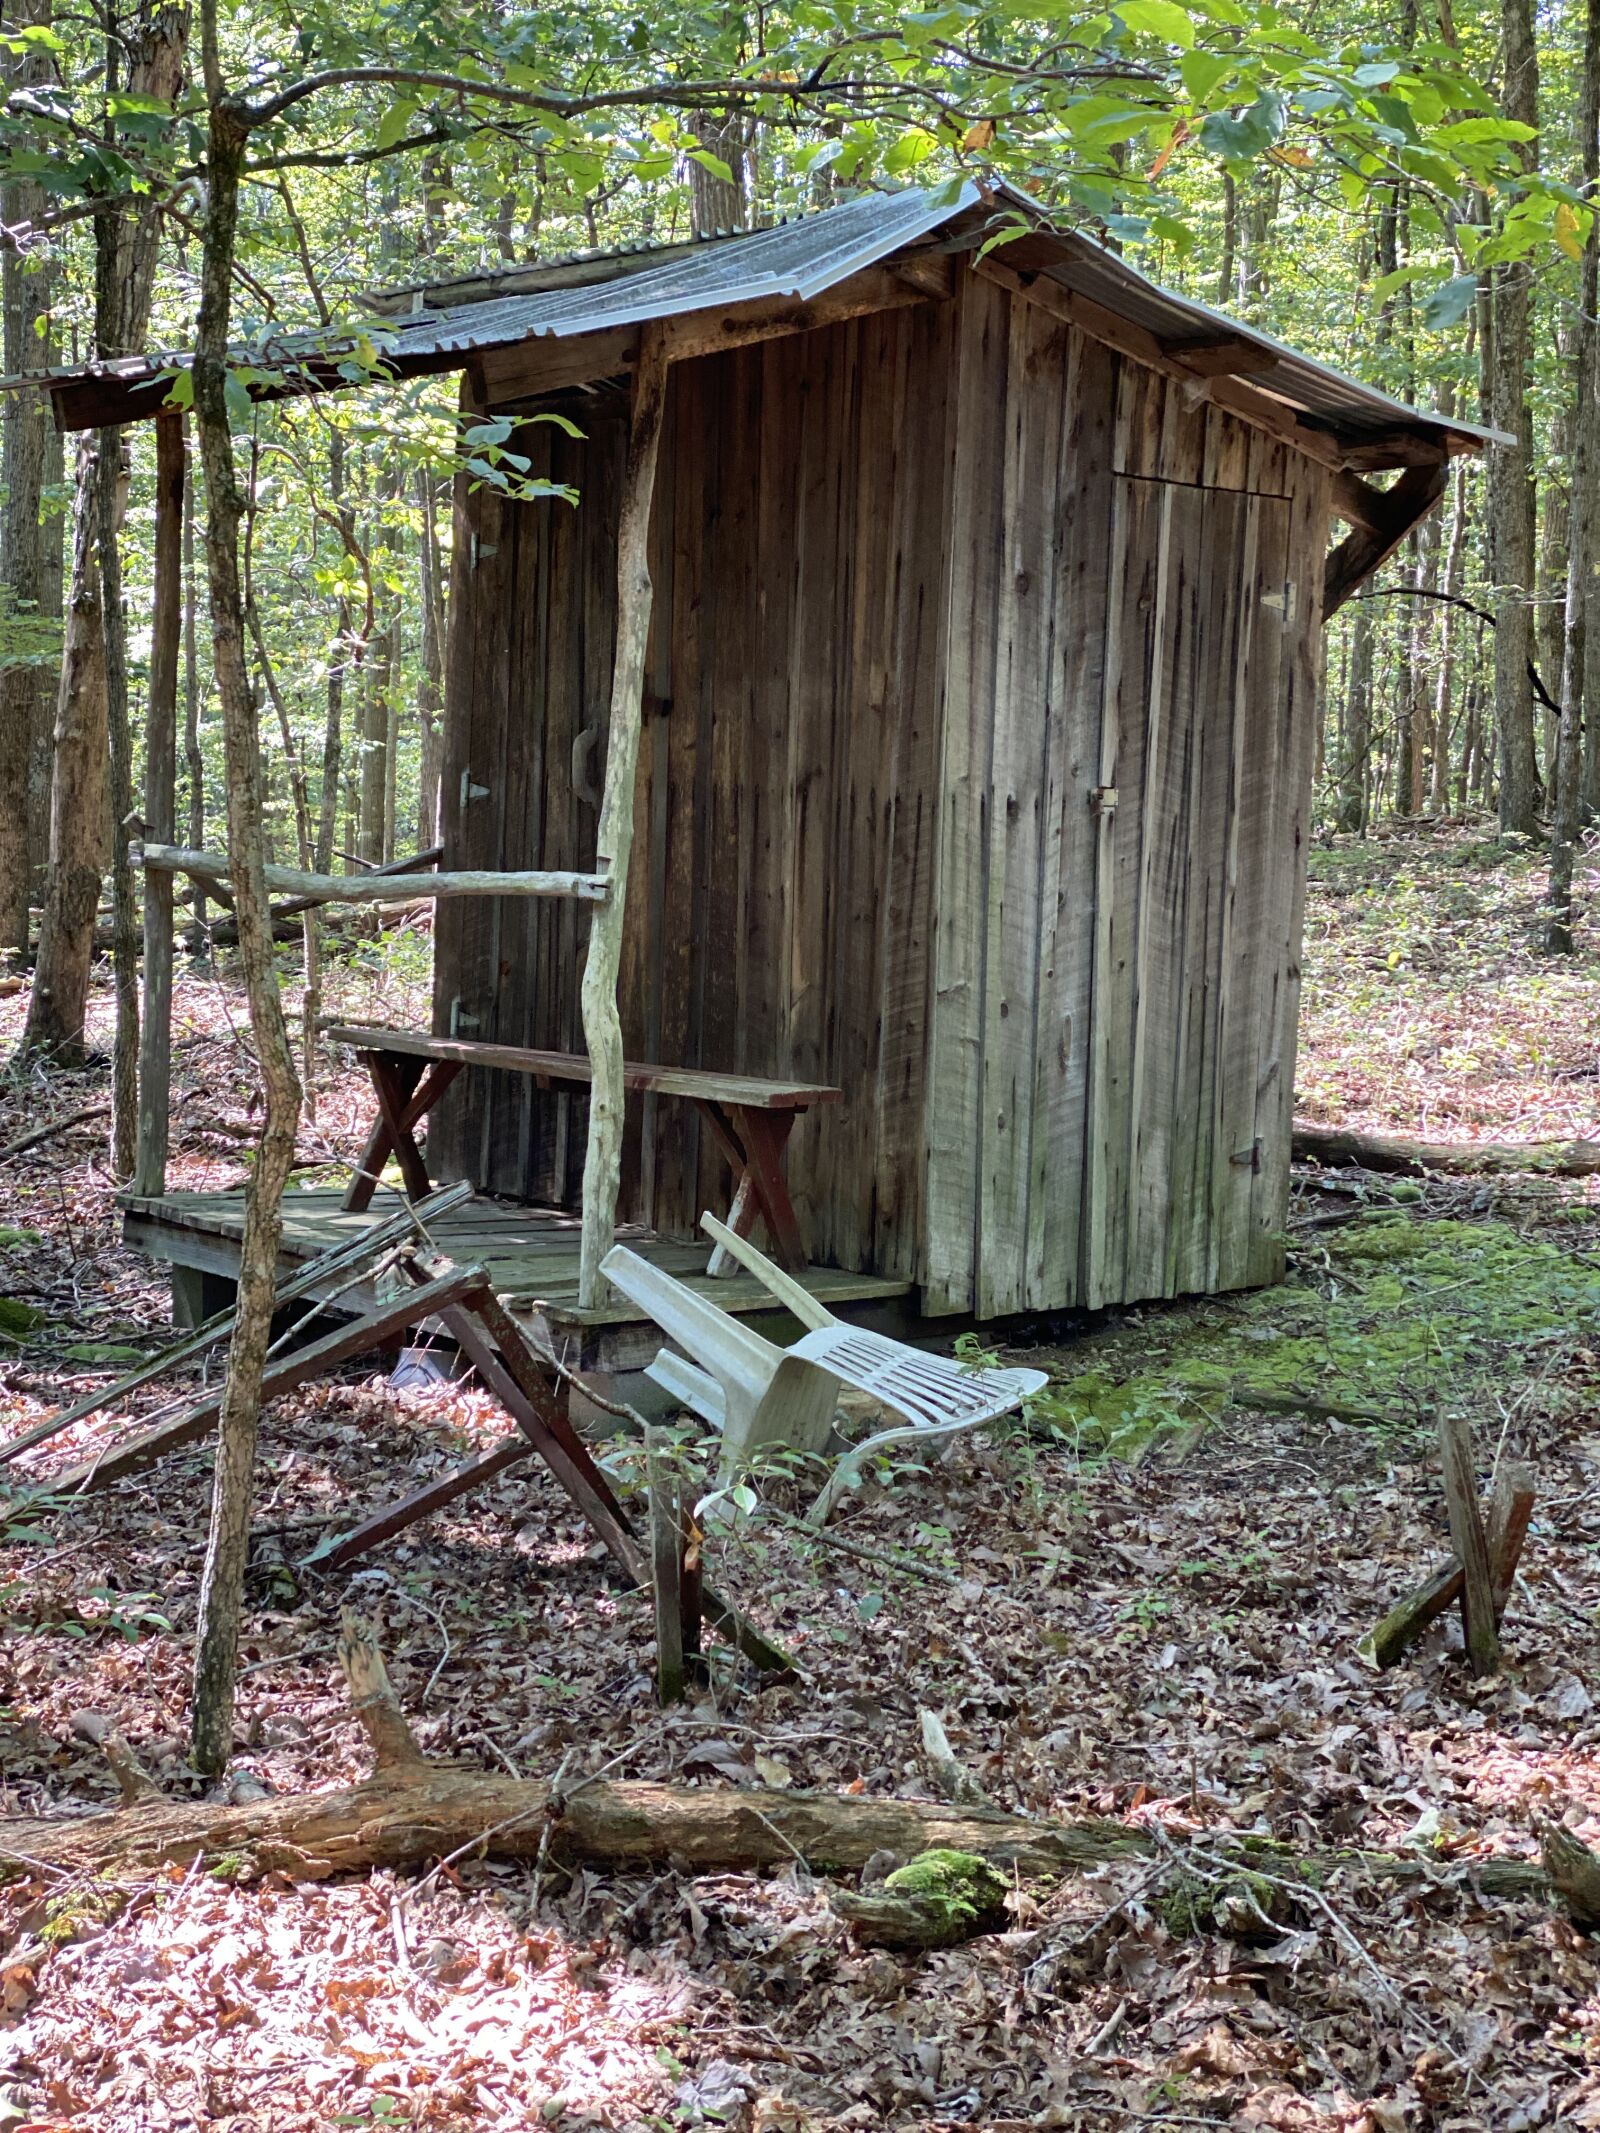 Apple iPhone 11 Pro + iPhone 11 Pro back dual camera 6mm f/2 sample photo. Wood building, outhouse, toilet photography